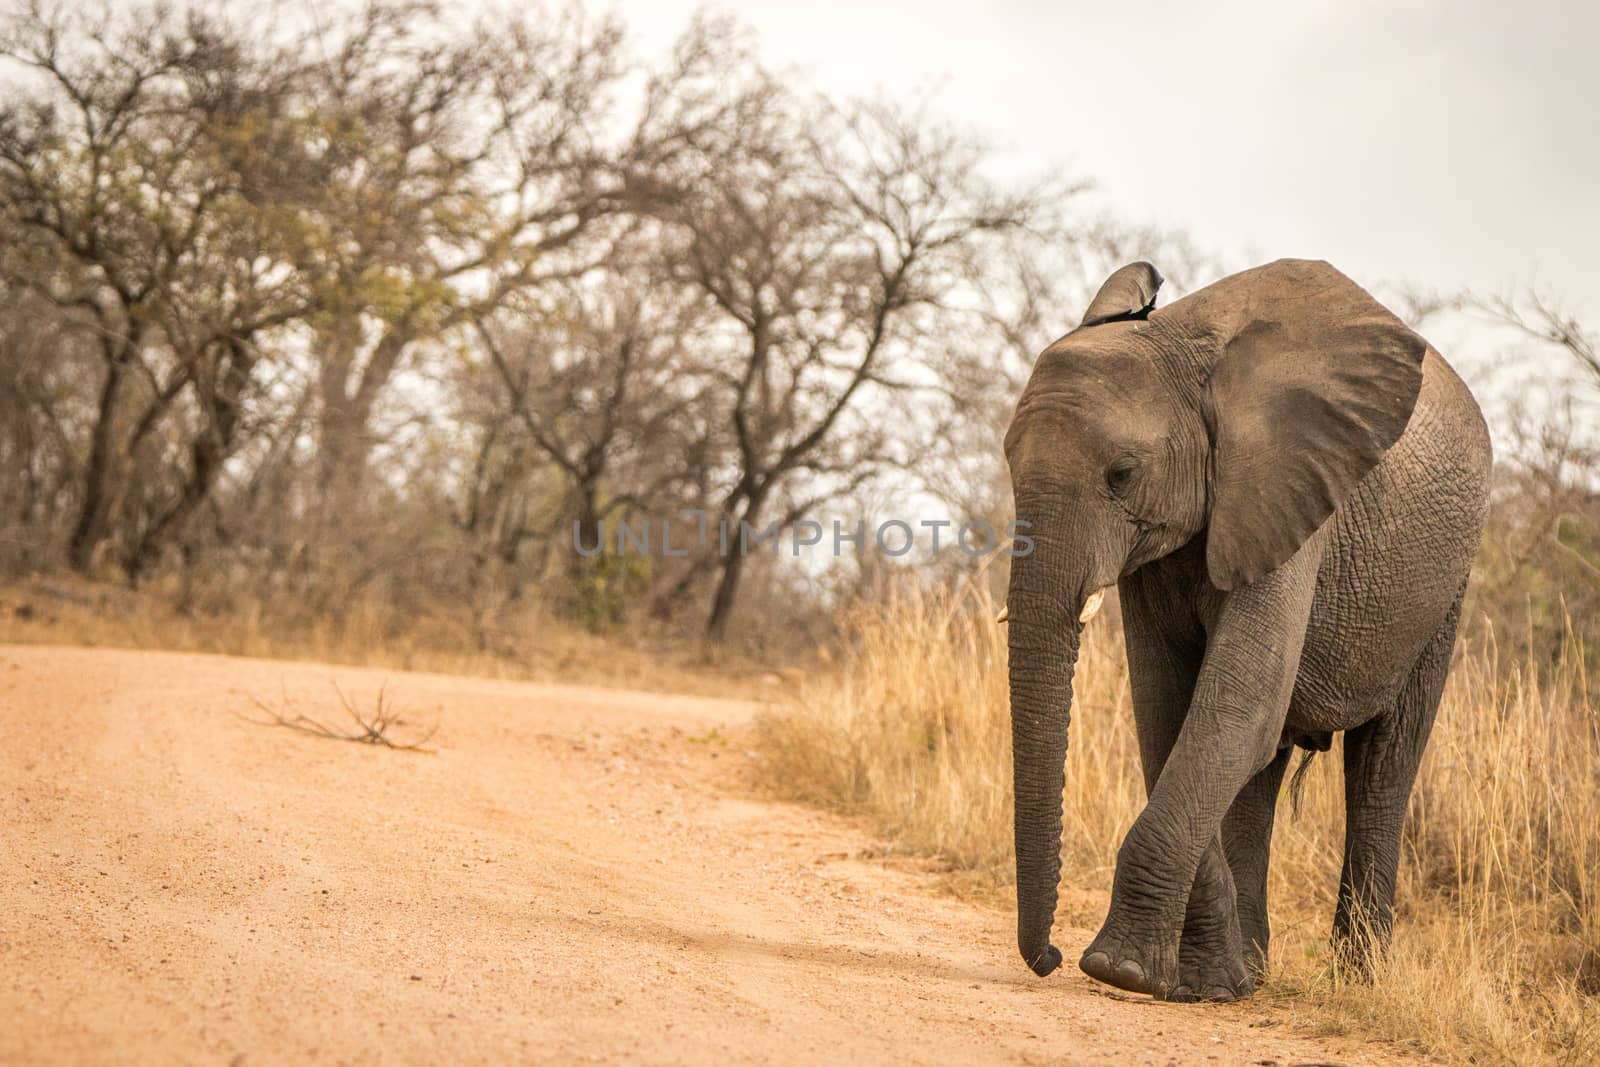 An Elephant walking on a dirt road in the Kruger National Park, South Africa.